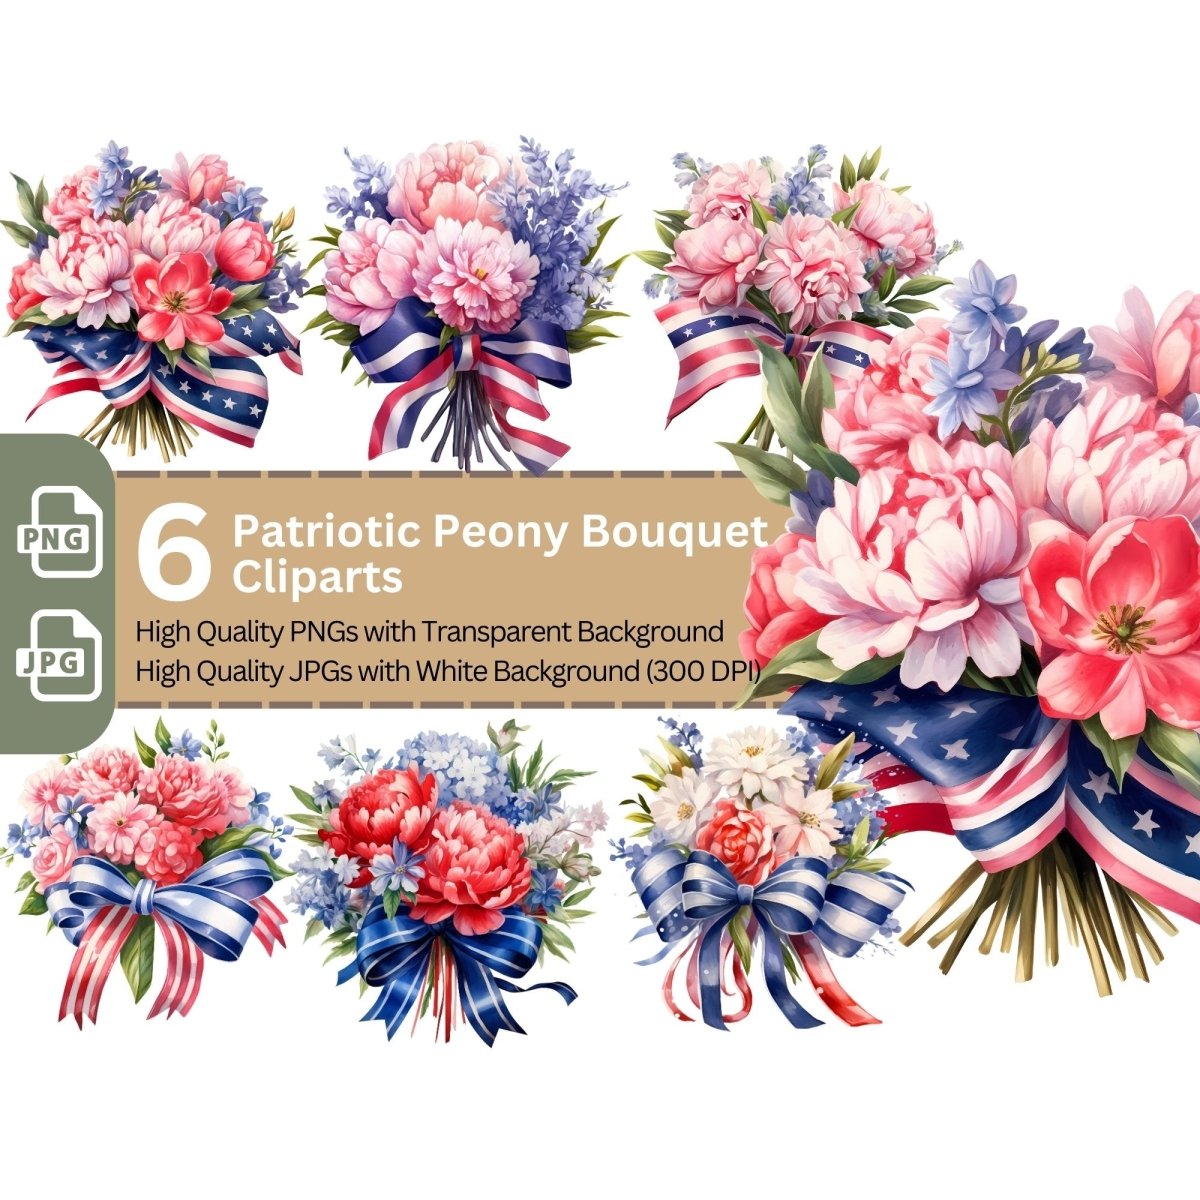 Patriotic Peony Bouquet 6+6 PNG Clip Art Bundle 4th july - Everything Pixel